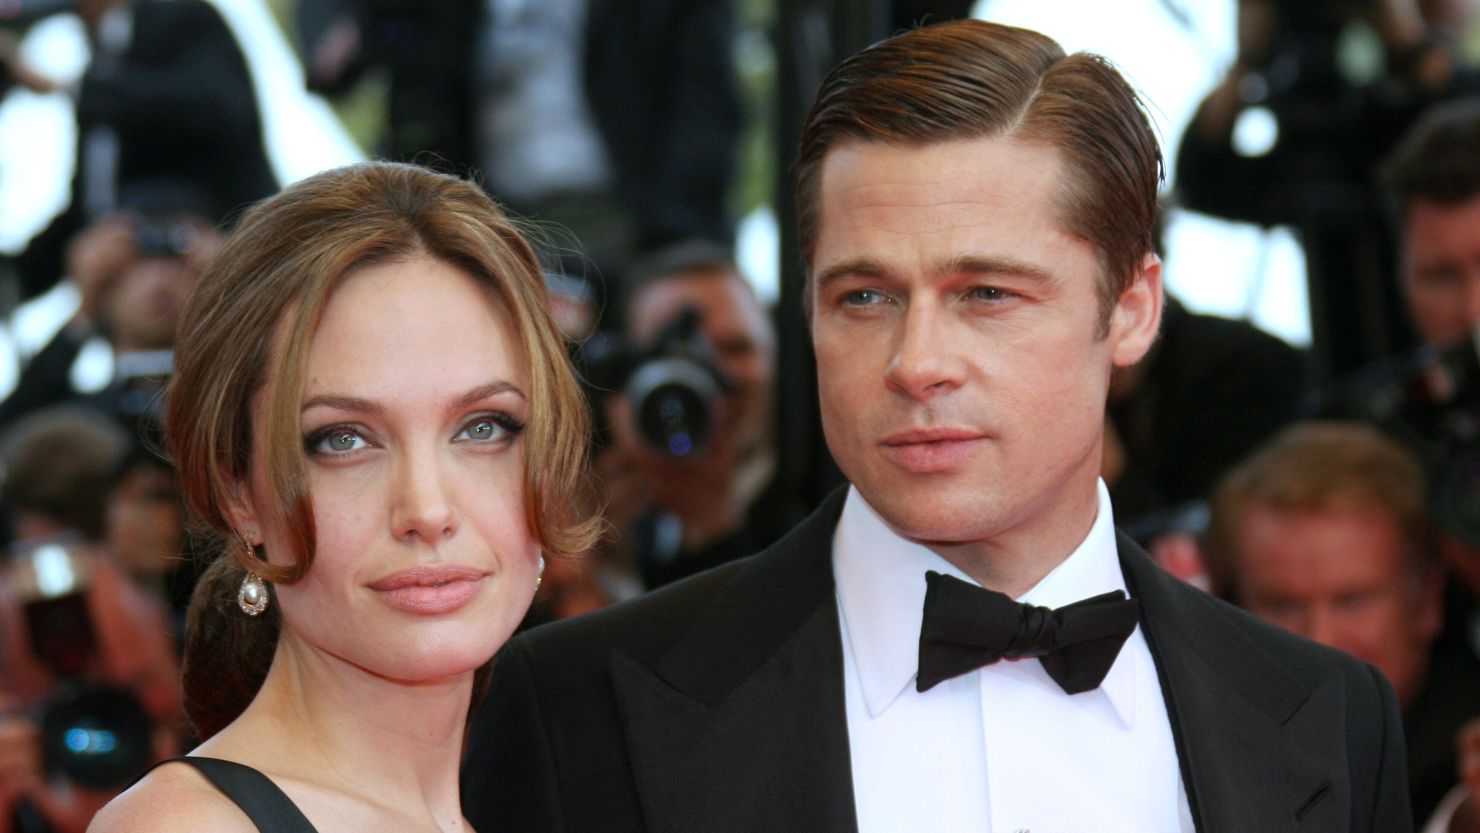 (From left) Angelina Jolie and Brad Pitt at the 2007 Cannes Film Festival in France.